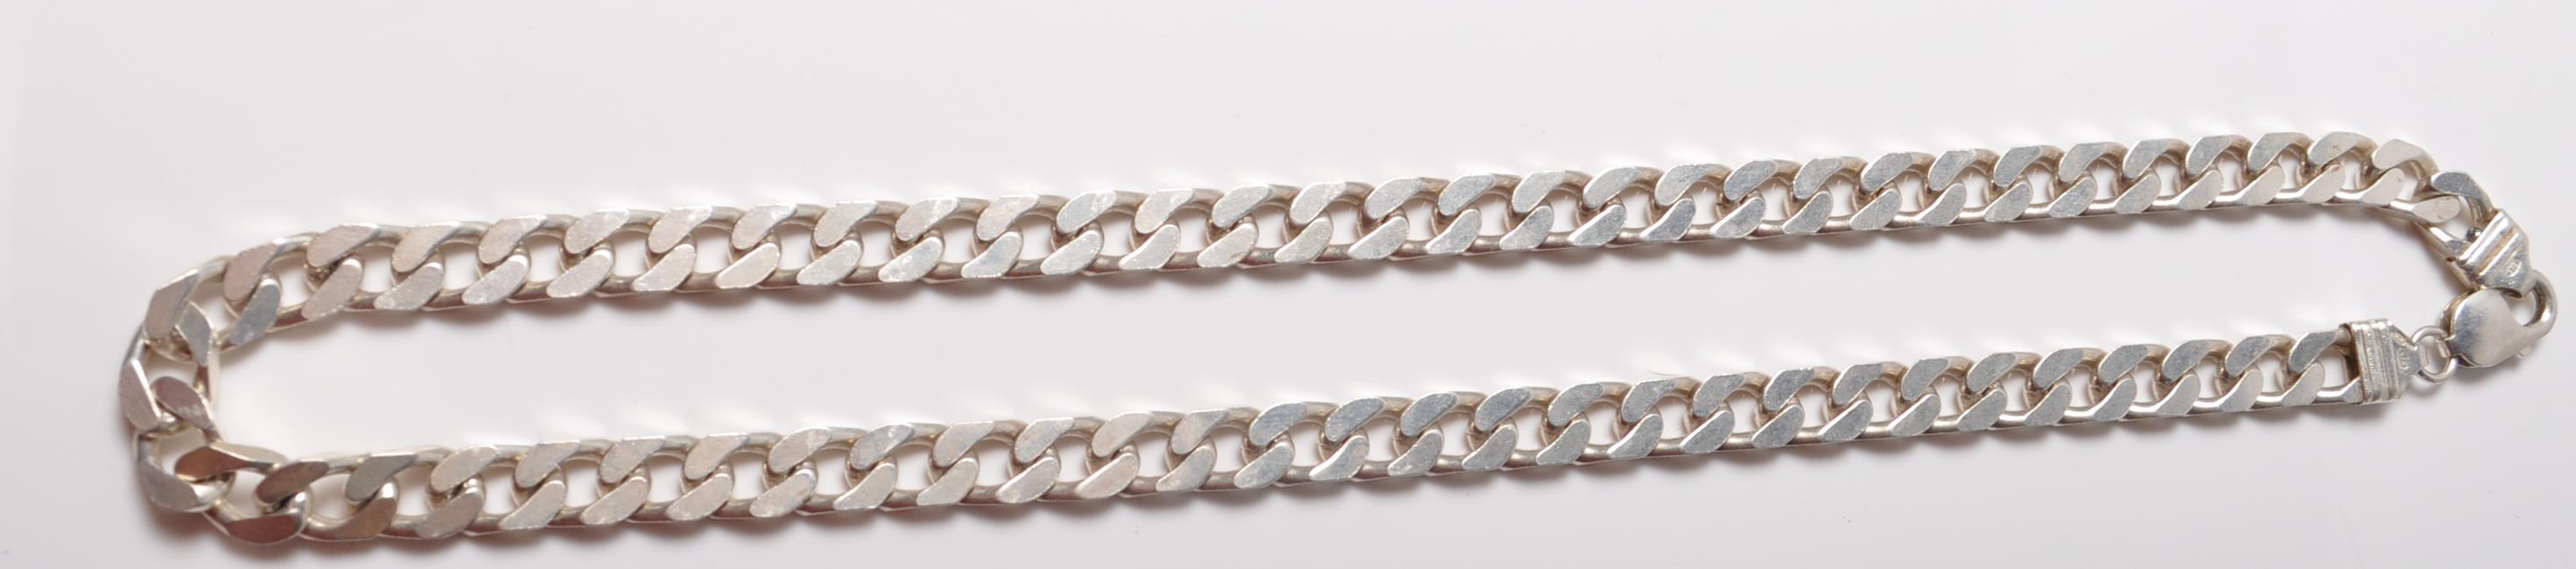 925 SILVER MENS FLAT CURB LINK CHAIN. - Image 2 of 6